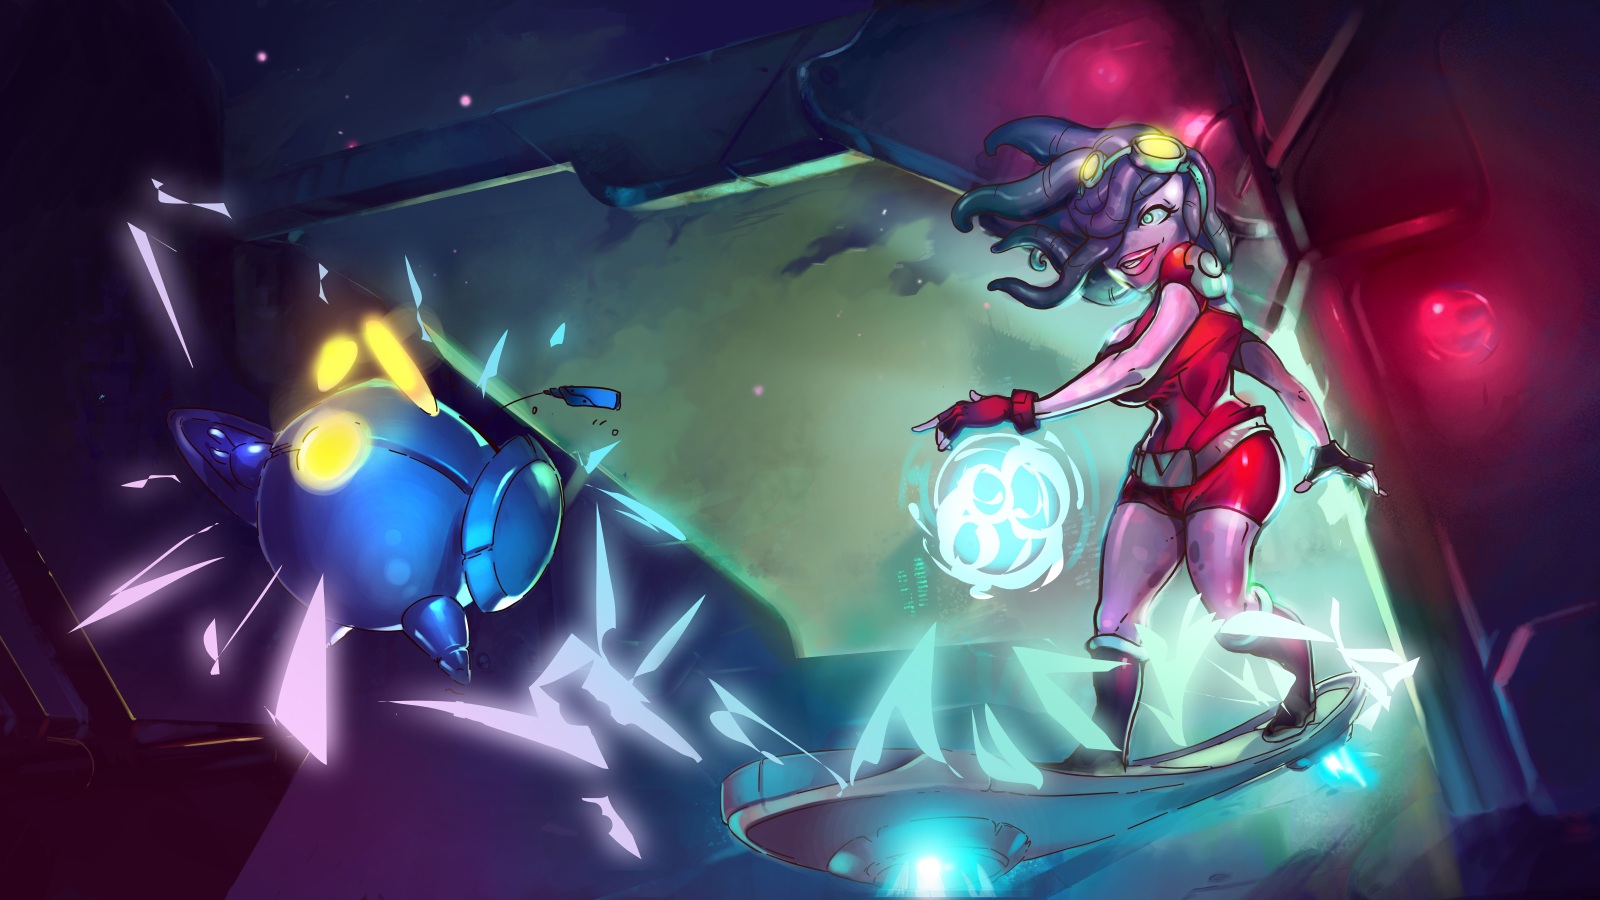 Awesomenauts community address includes new character, patch